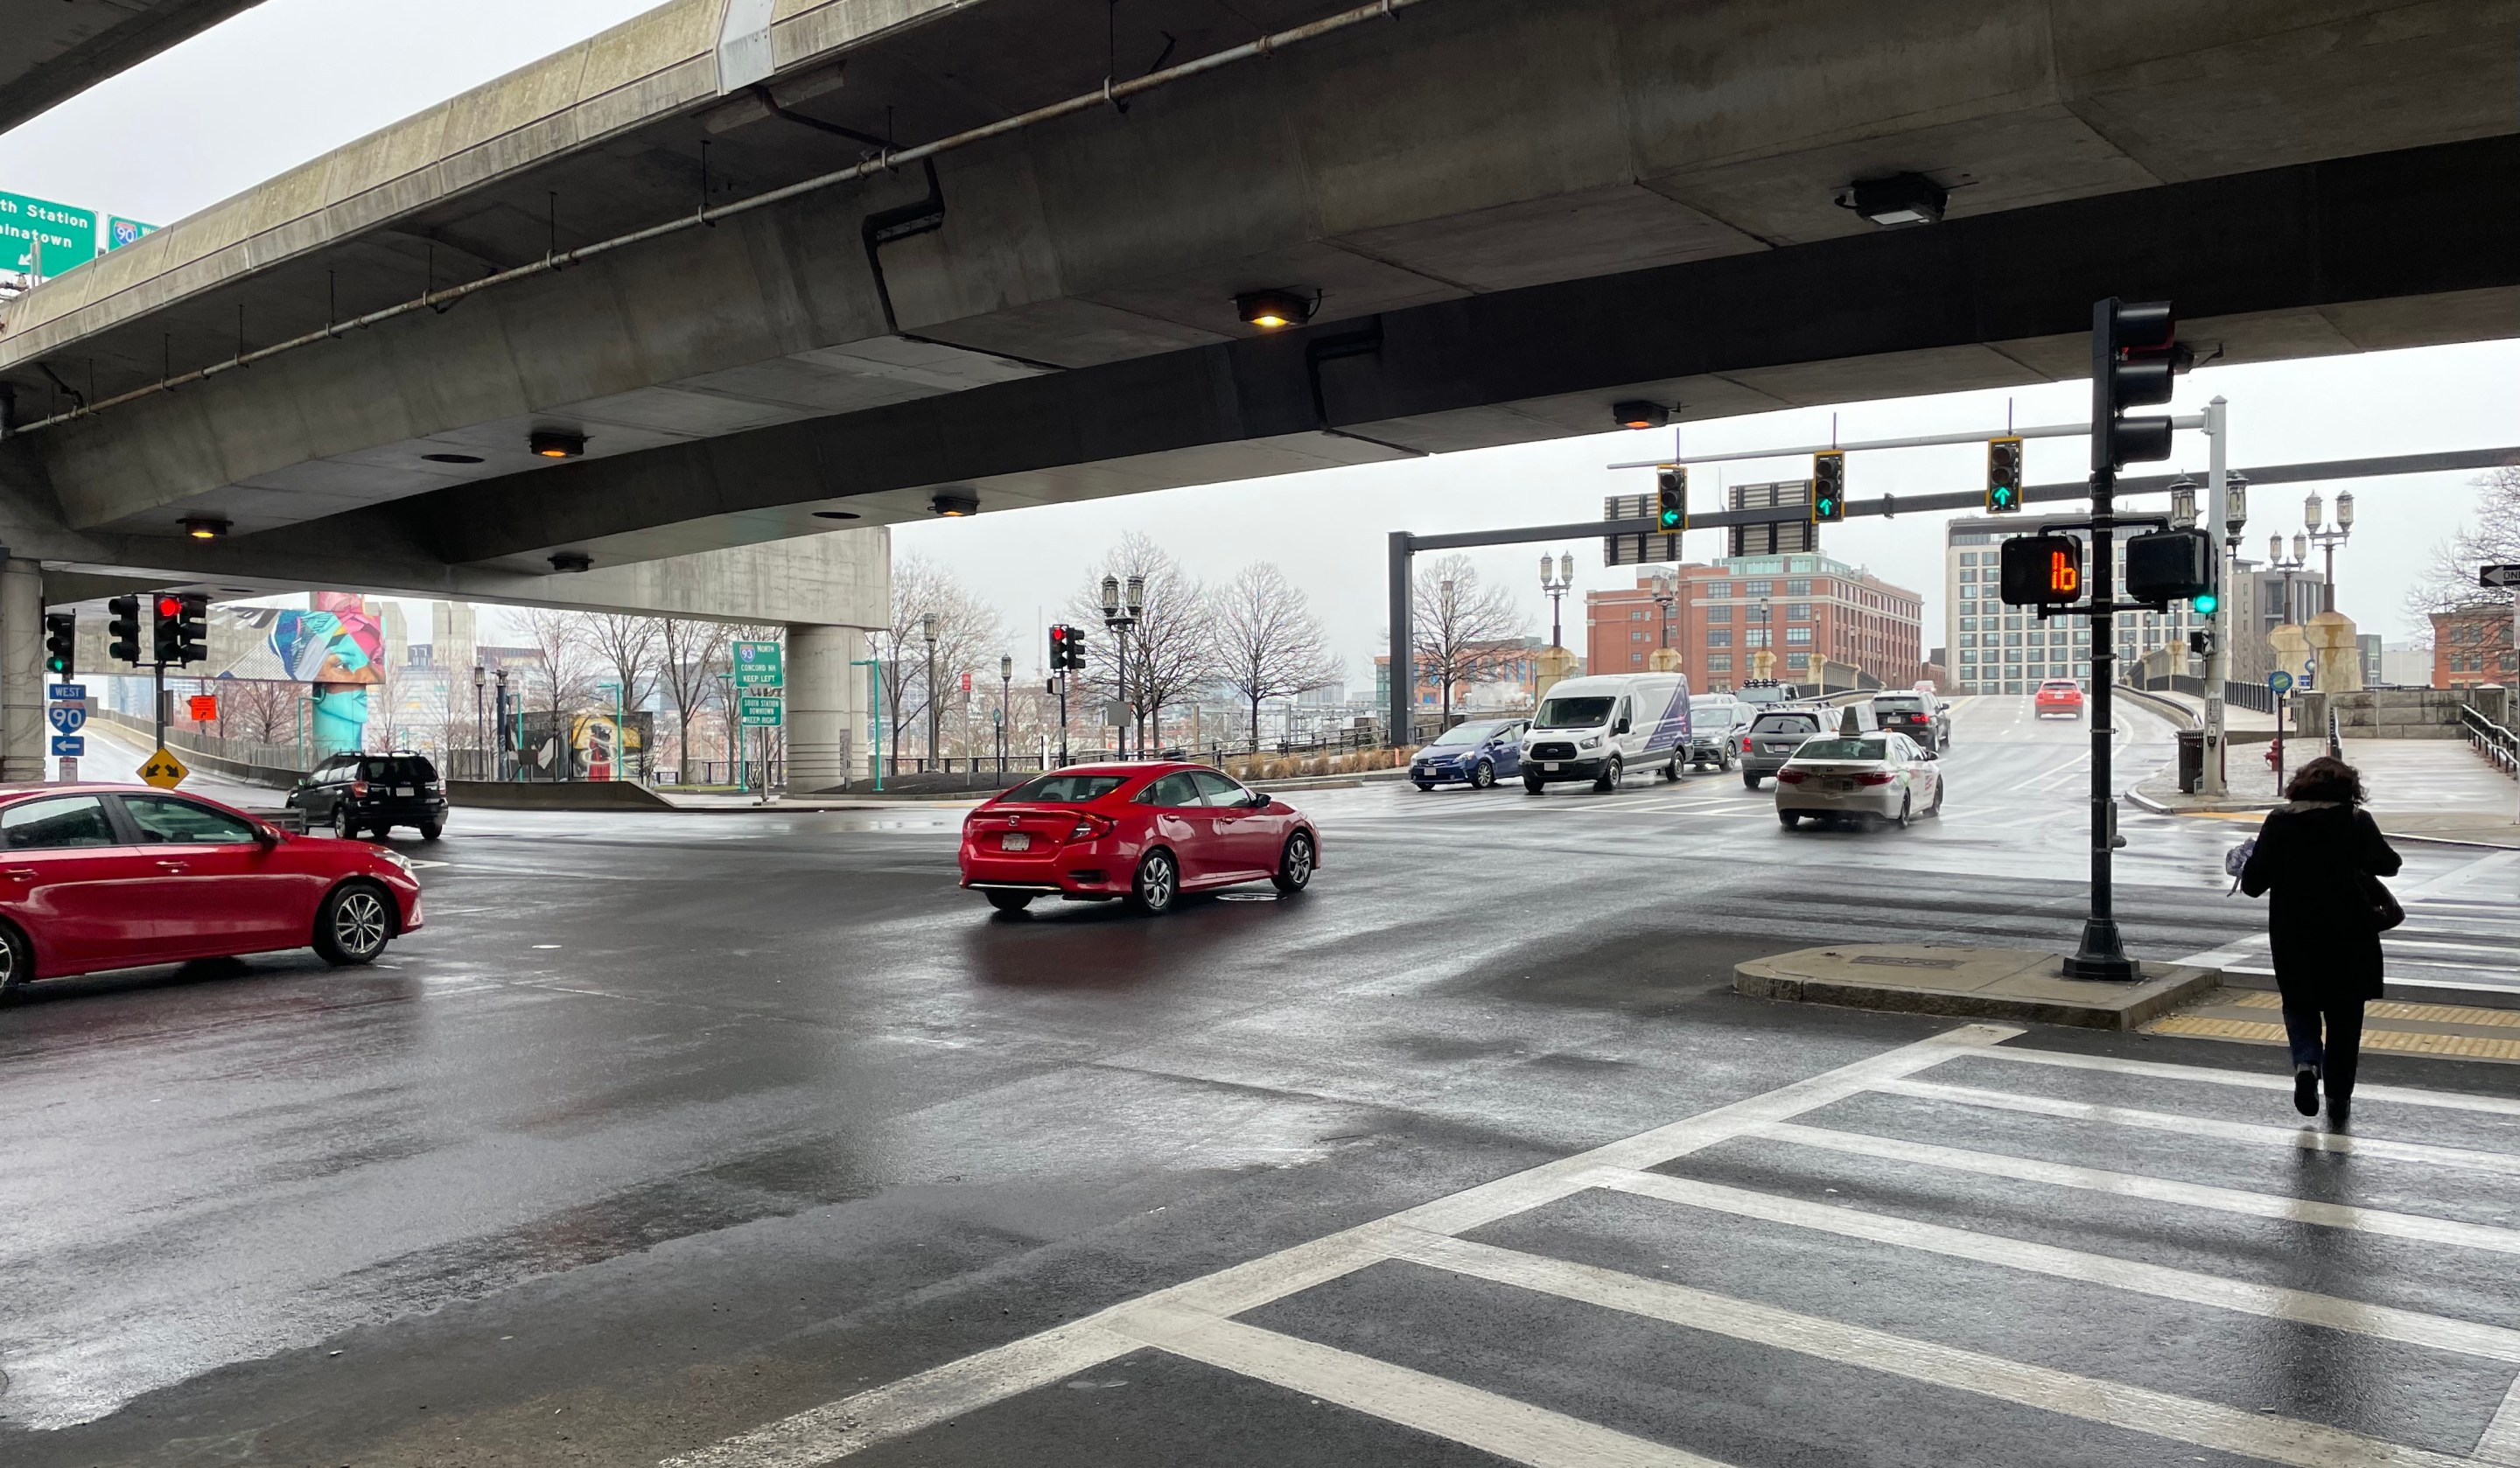 Several cars speed through a wide multi-lane intersection underneath a concrete highway viaduct. On the left edge of the photo are signs for I-90 and I-93. On the right edge, a woman crosses several lanes of traffic in a crosswalk.